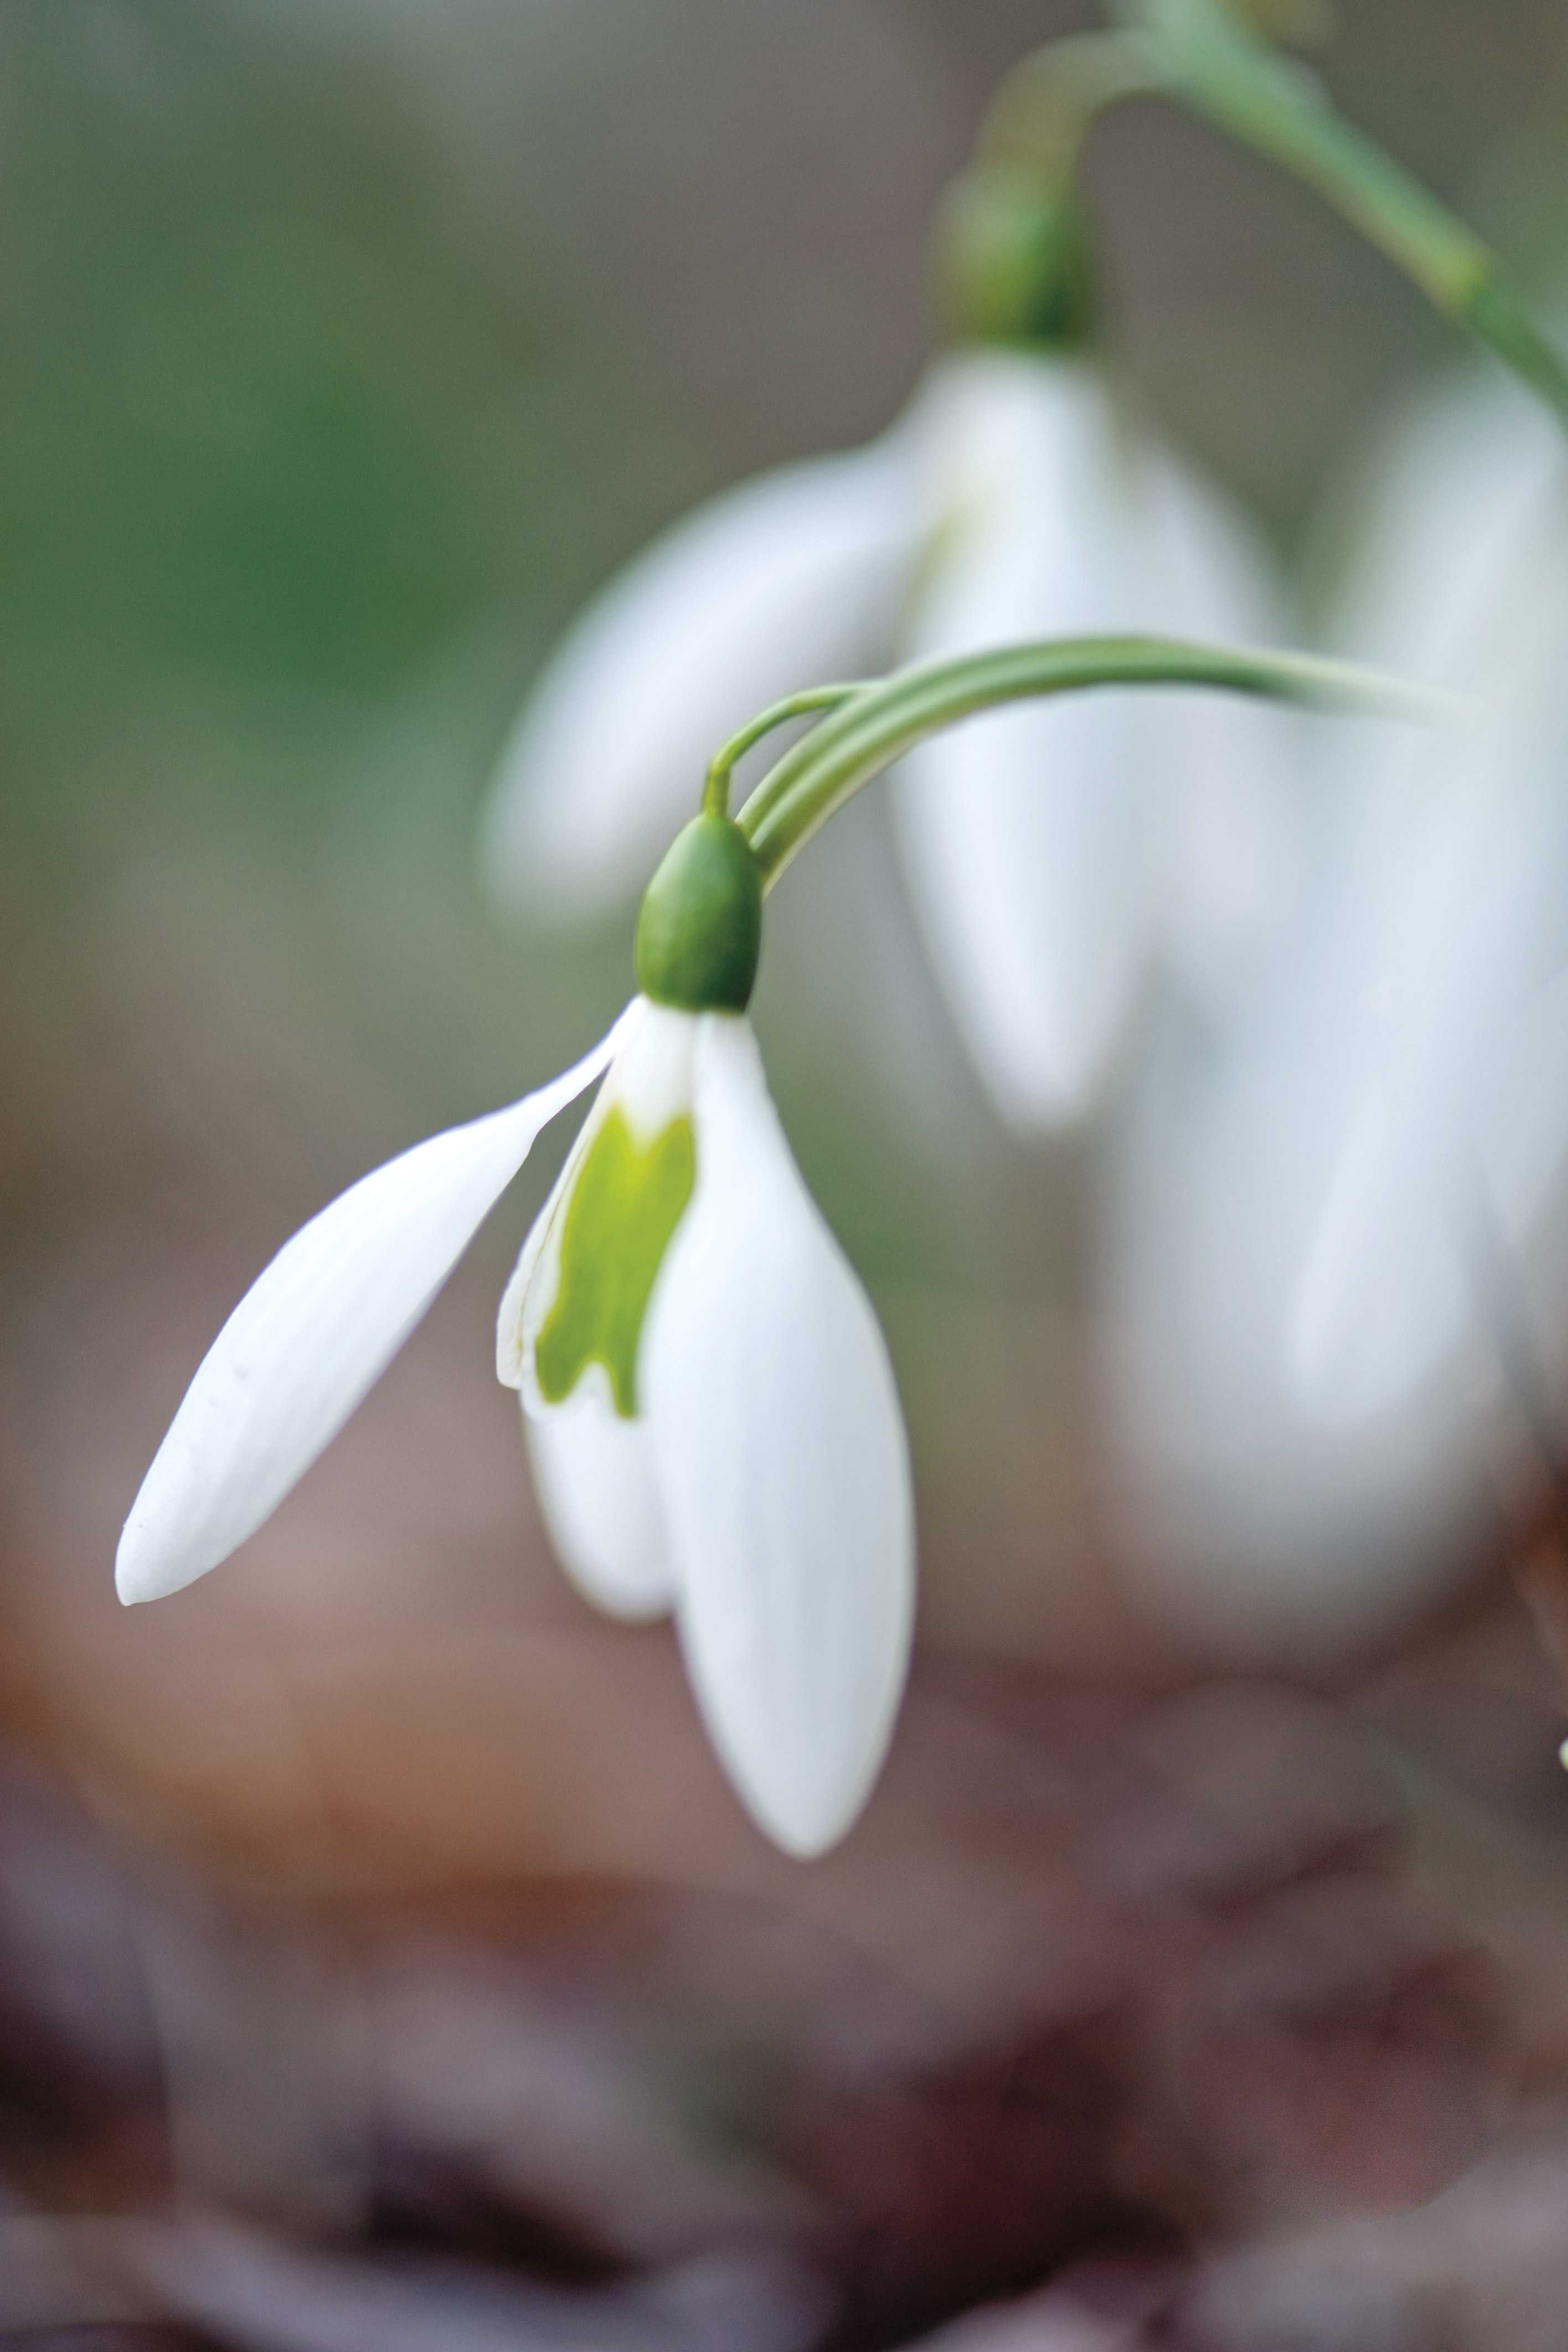 Drooping Snowdrop